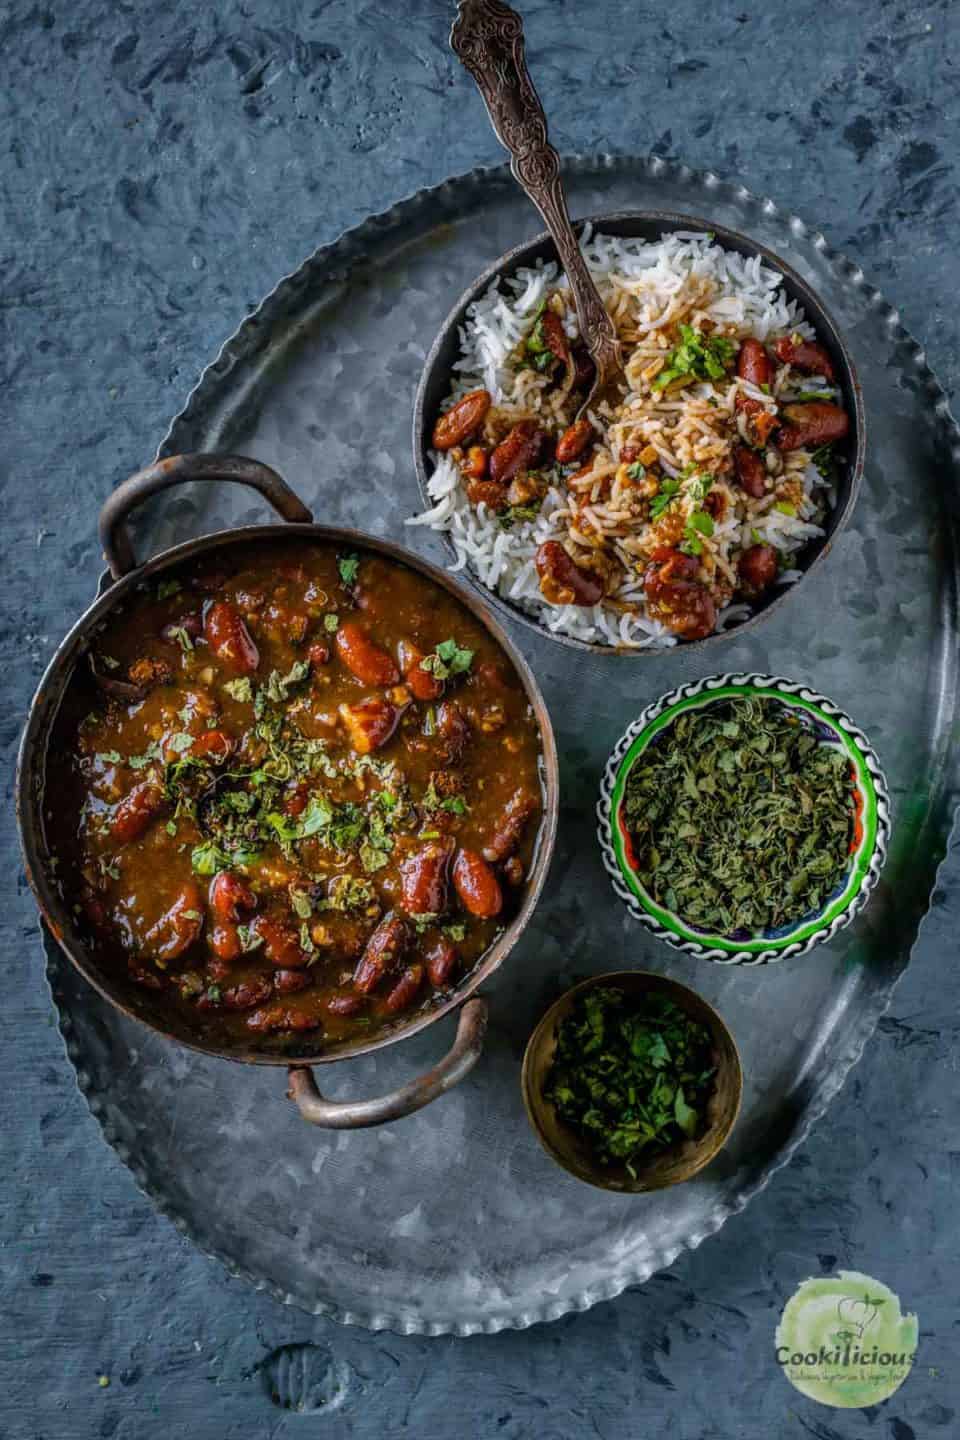 Instant pot rajma masala served with rice on the side